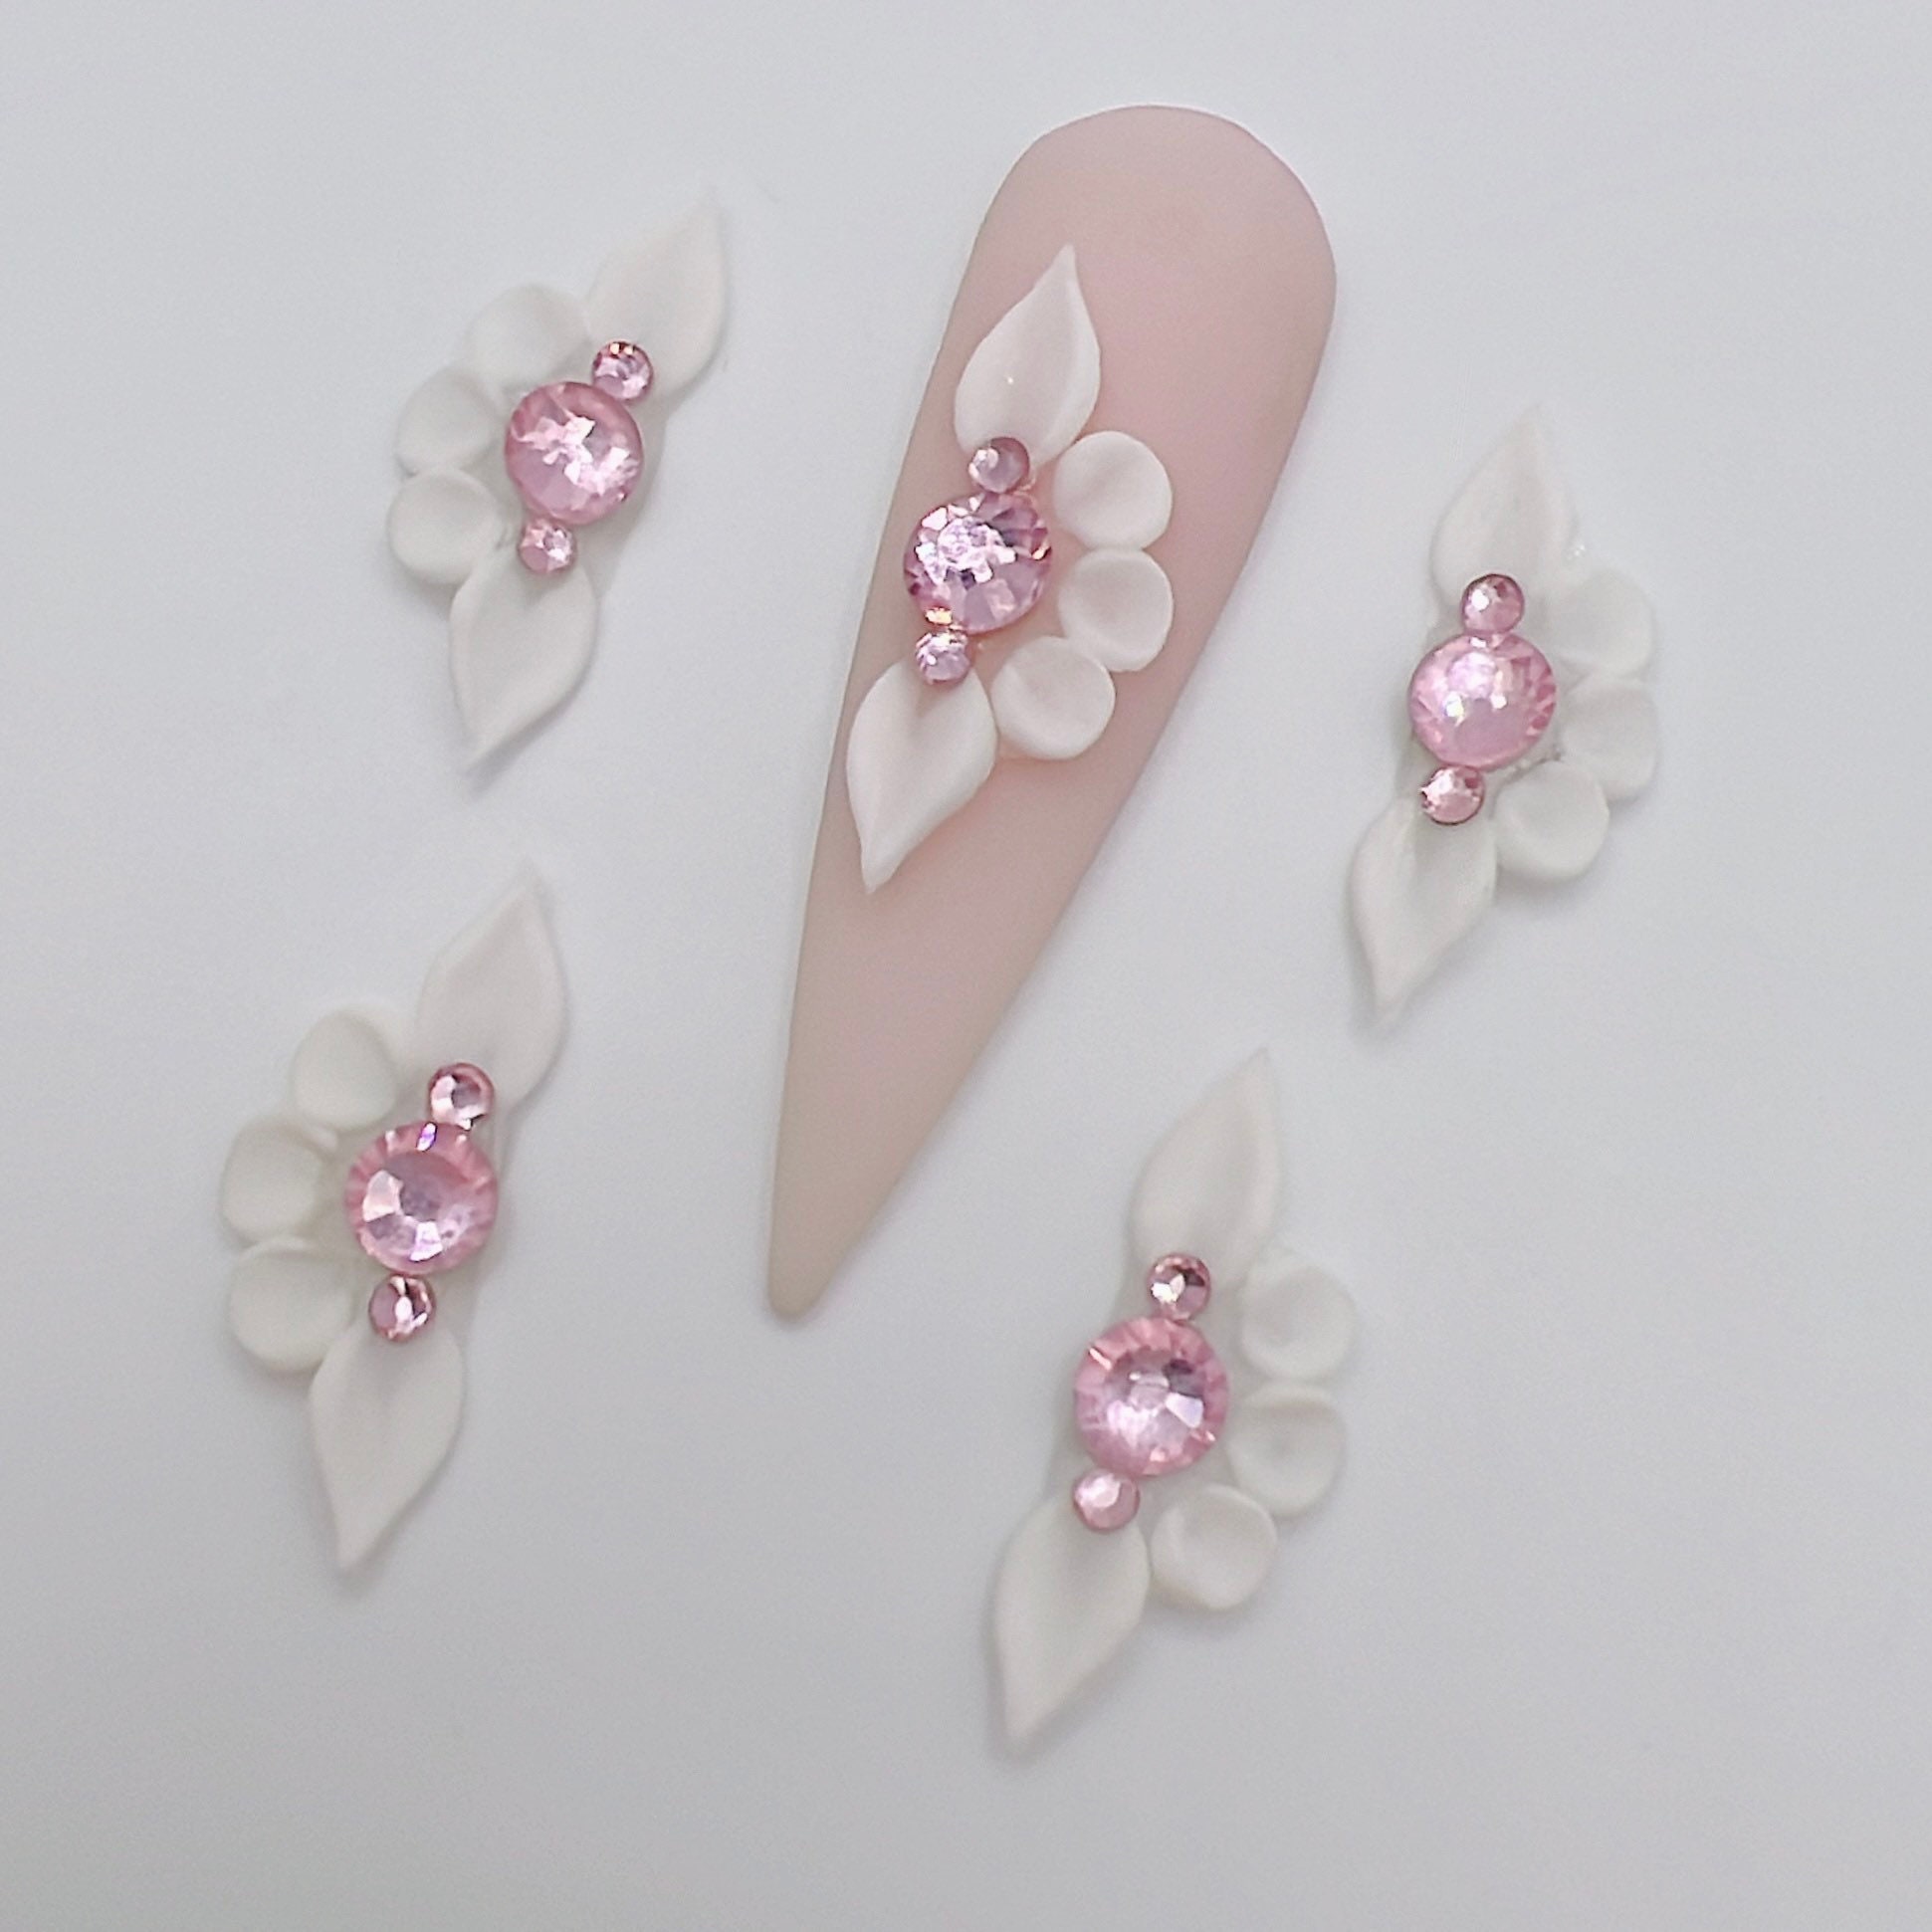 Nails Of The Week: Acrylic Tips! | Flower nail designs, 3d flower nails, Flower  nail art